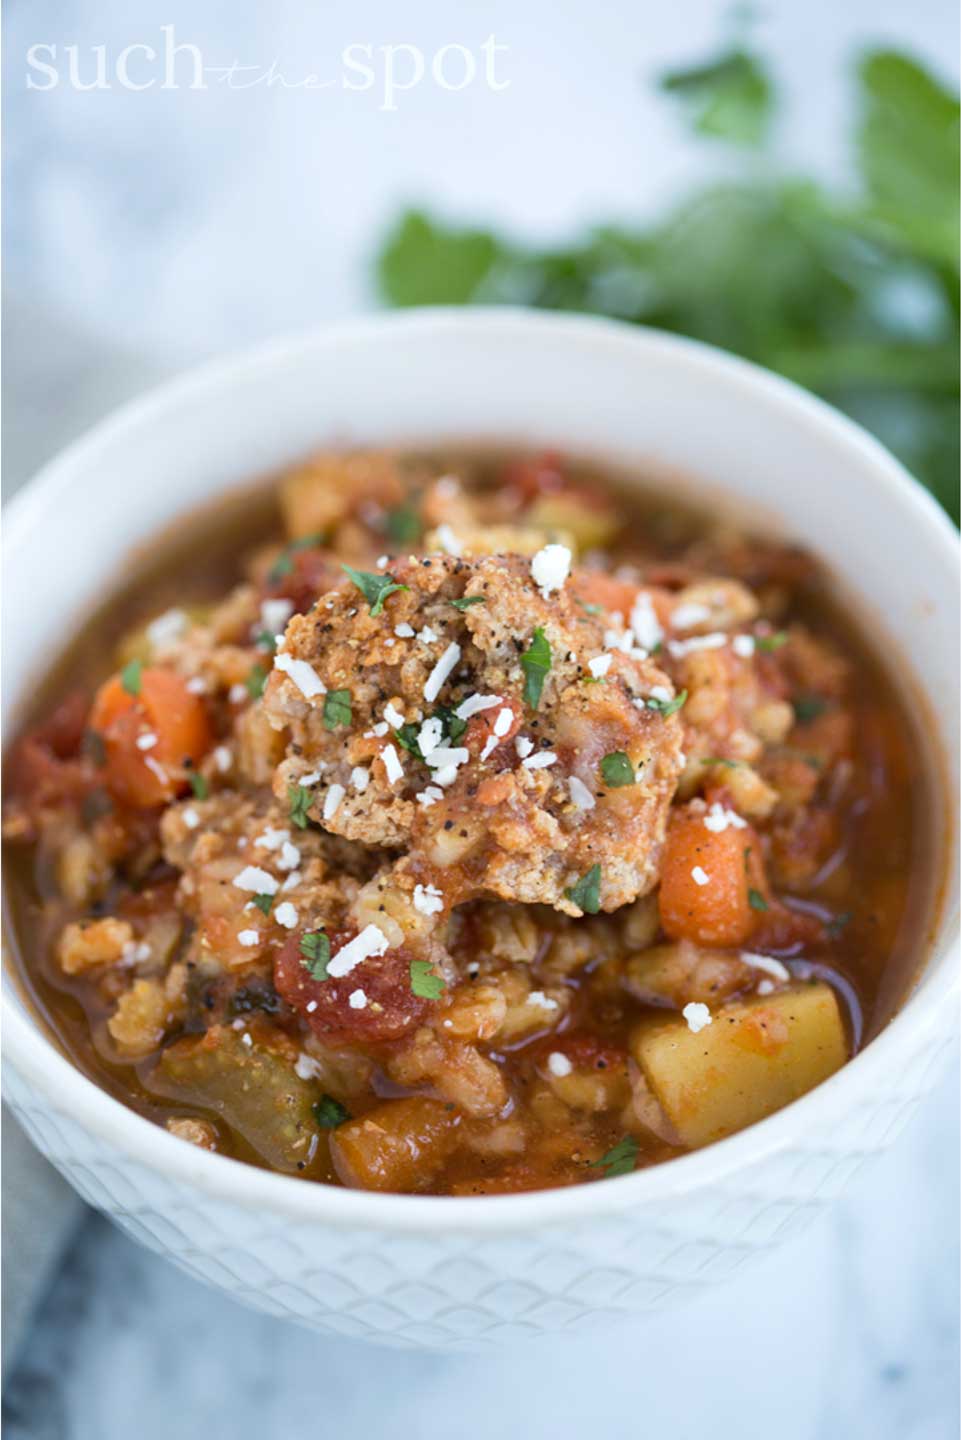 Instant Pot Mexican Meatball and Barley Soup from Darcie at Such the Spot is just one of the comforting soup recipes we’ve got lined up for you – be sure to check out all the terrific pressure cooker soup recipes!